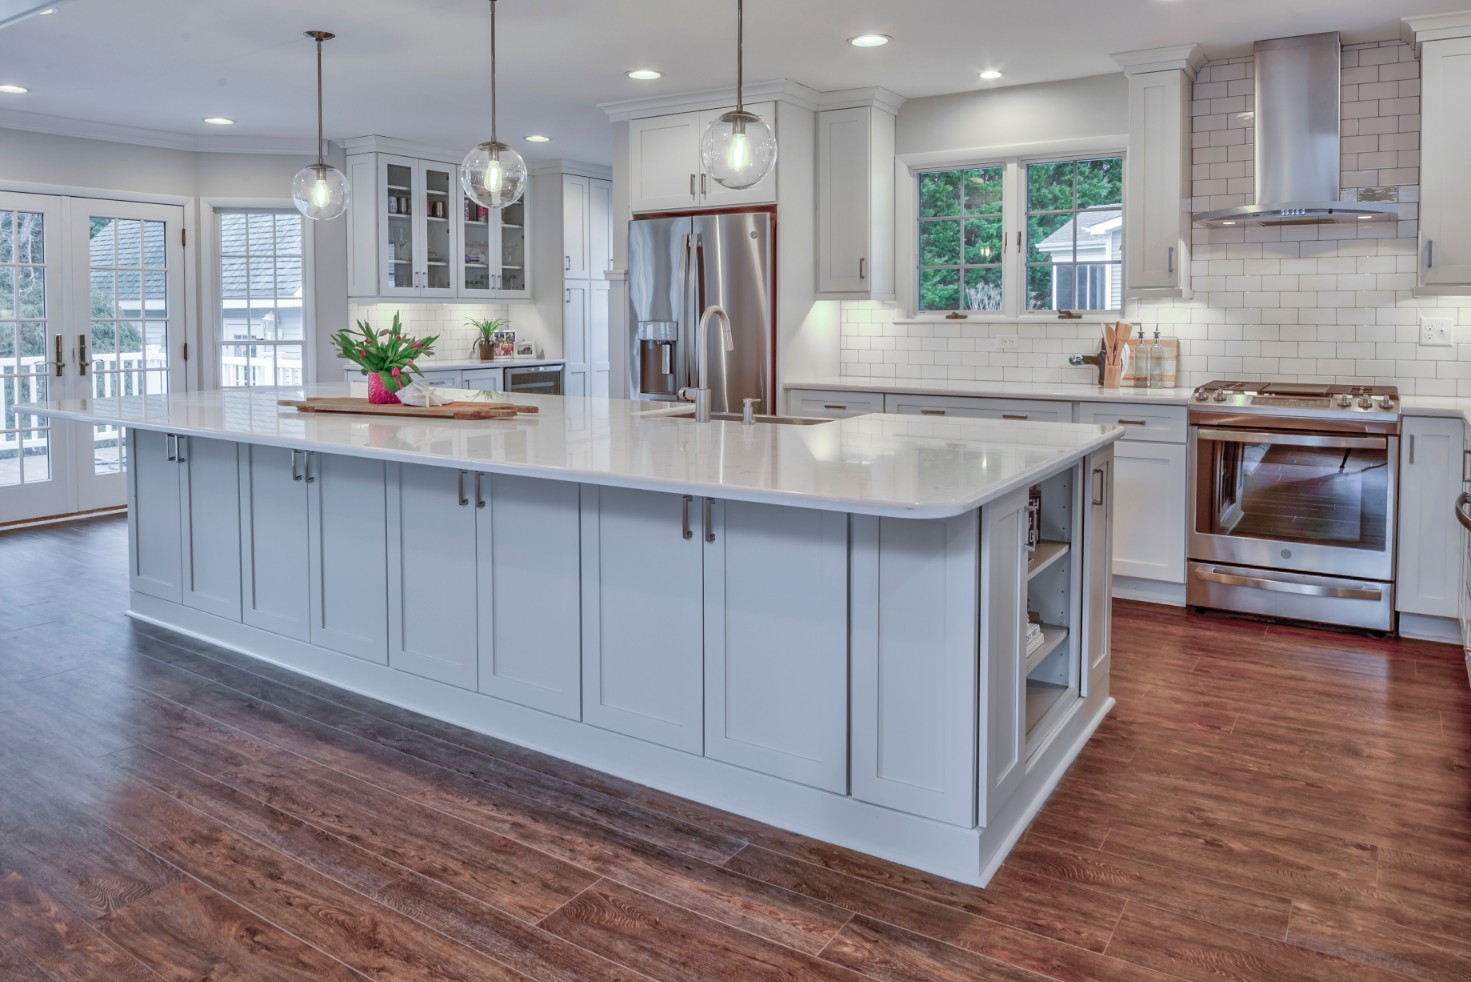 Canal Way Kitchen Remodel in Bethany Beach DE with Center Island and Dark Wood Flooring